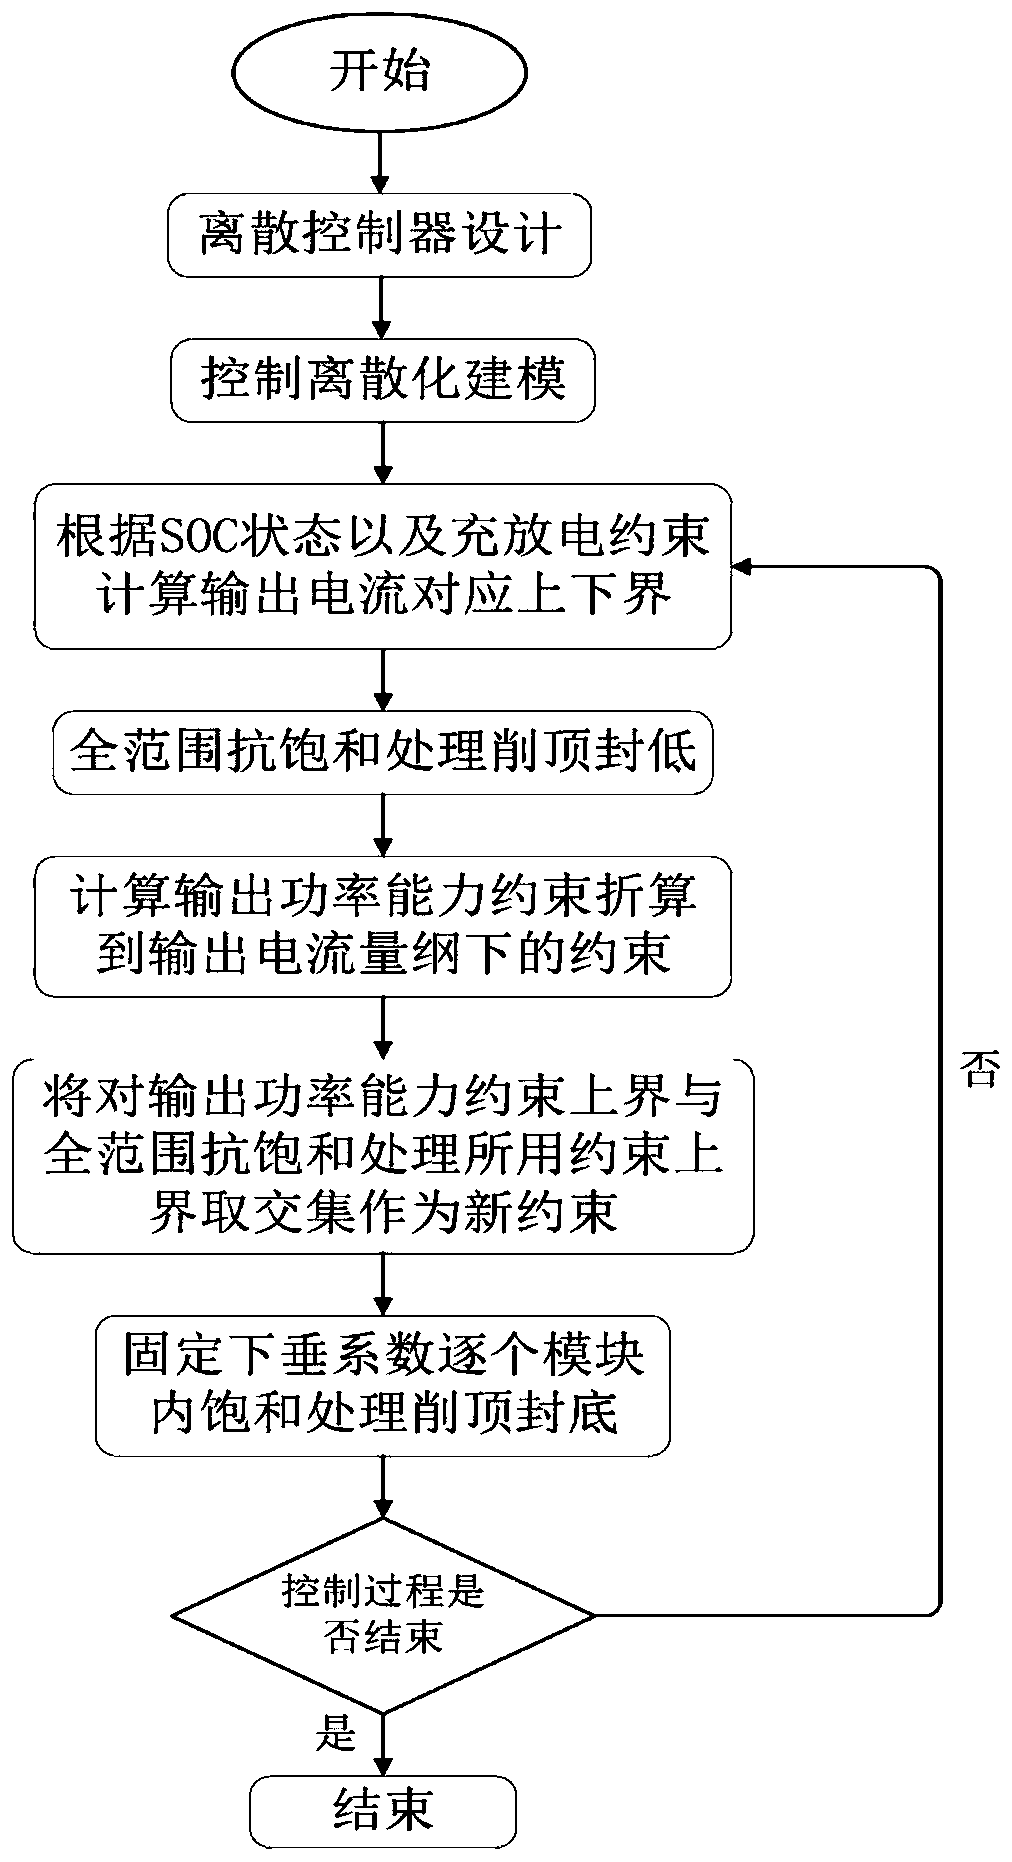 Discrete power generation, energy storage and power supply system cooperative control method